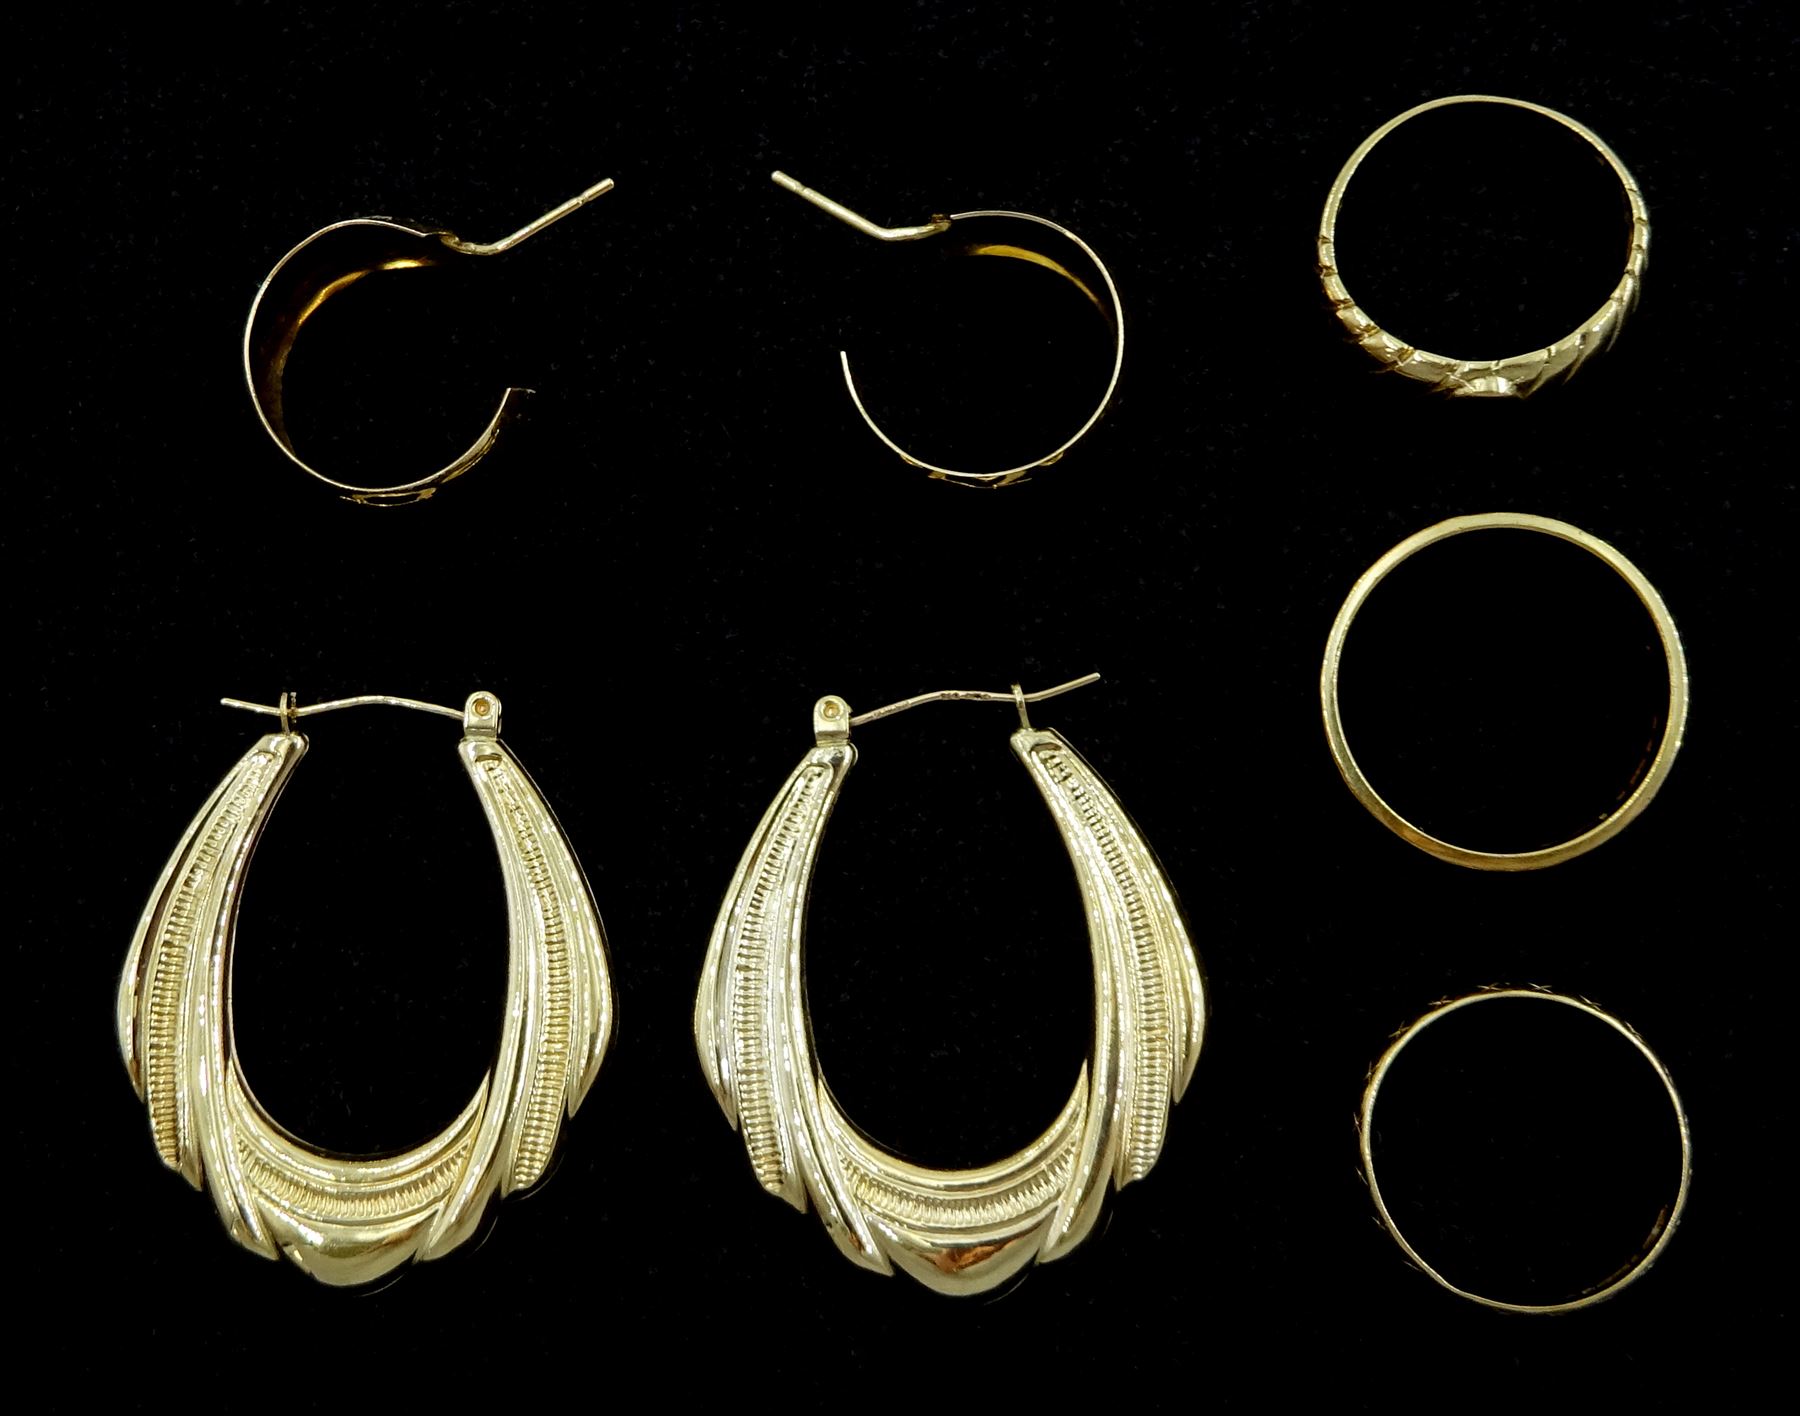 9ct gold jewellery including two pairs of hoop earrings and three rings